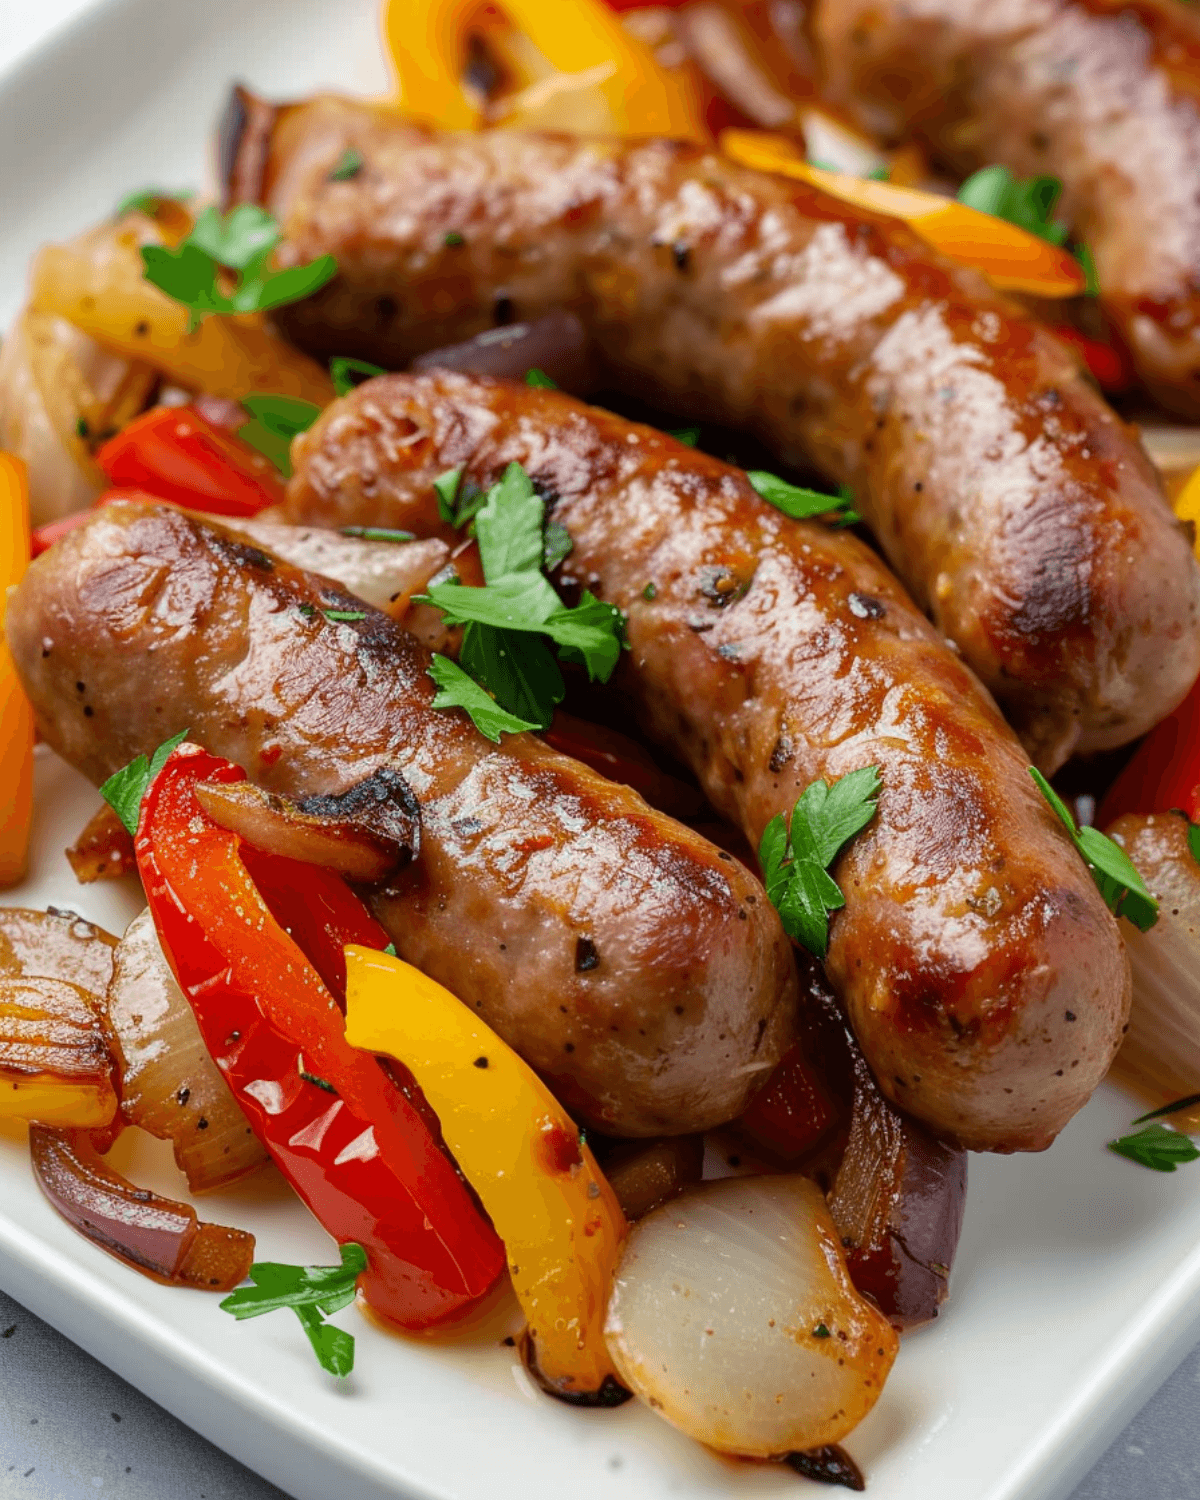 Baked sausages with peppers on a white plate.